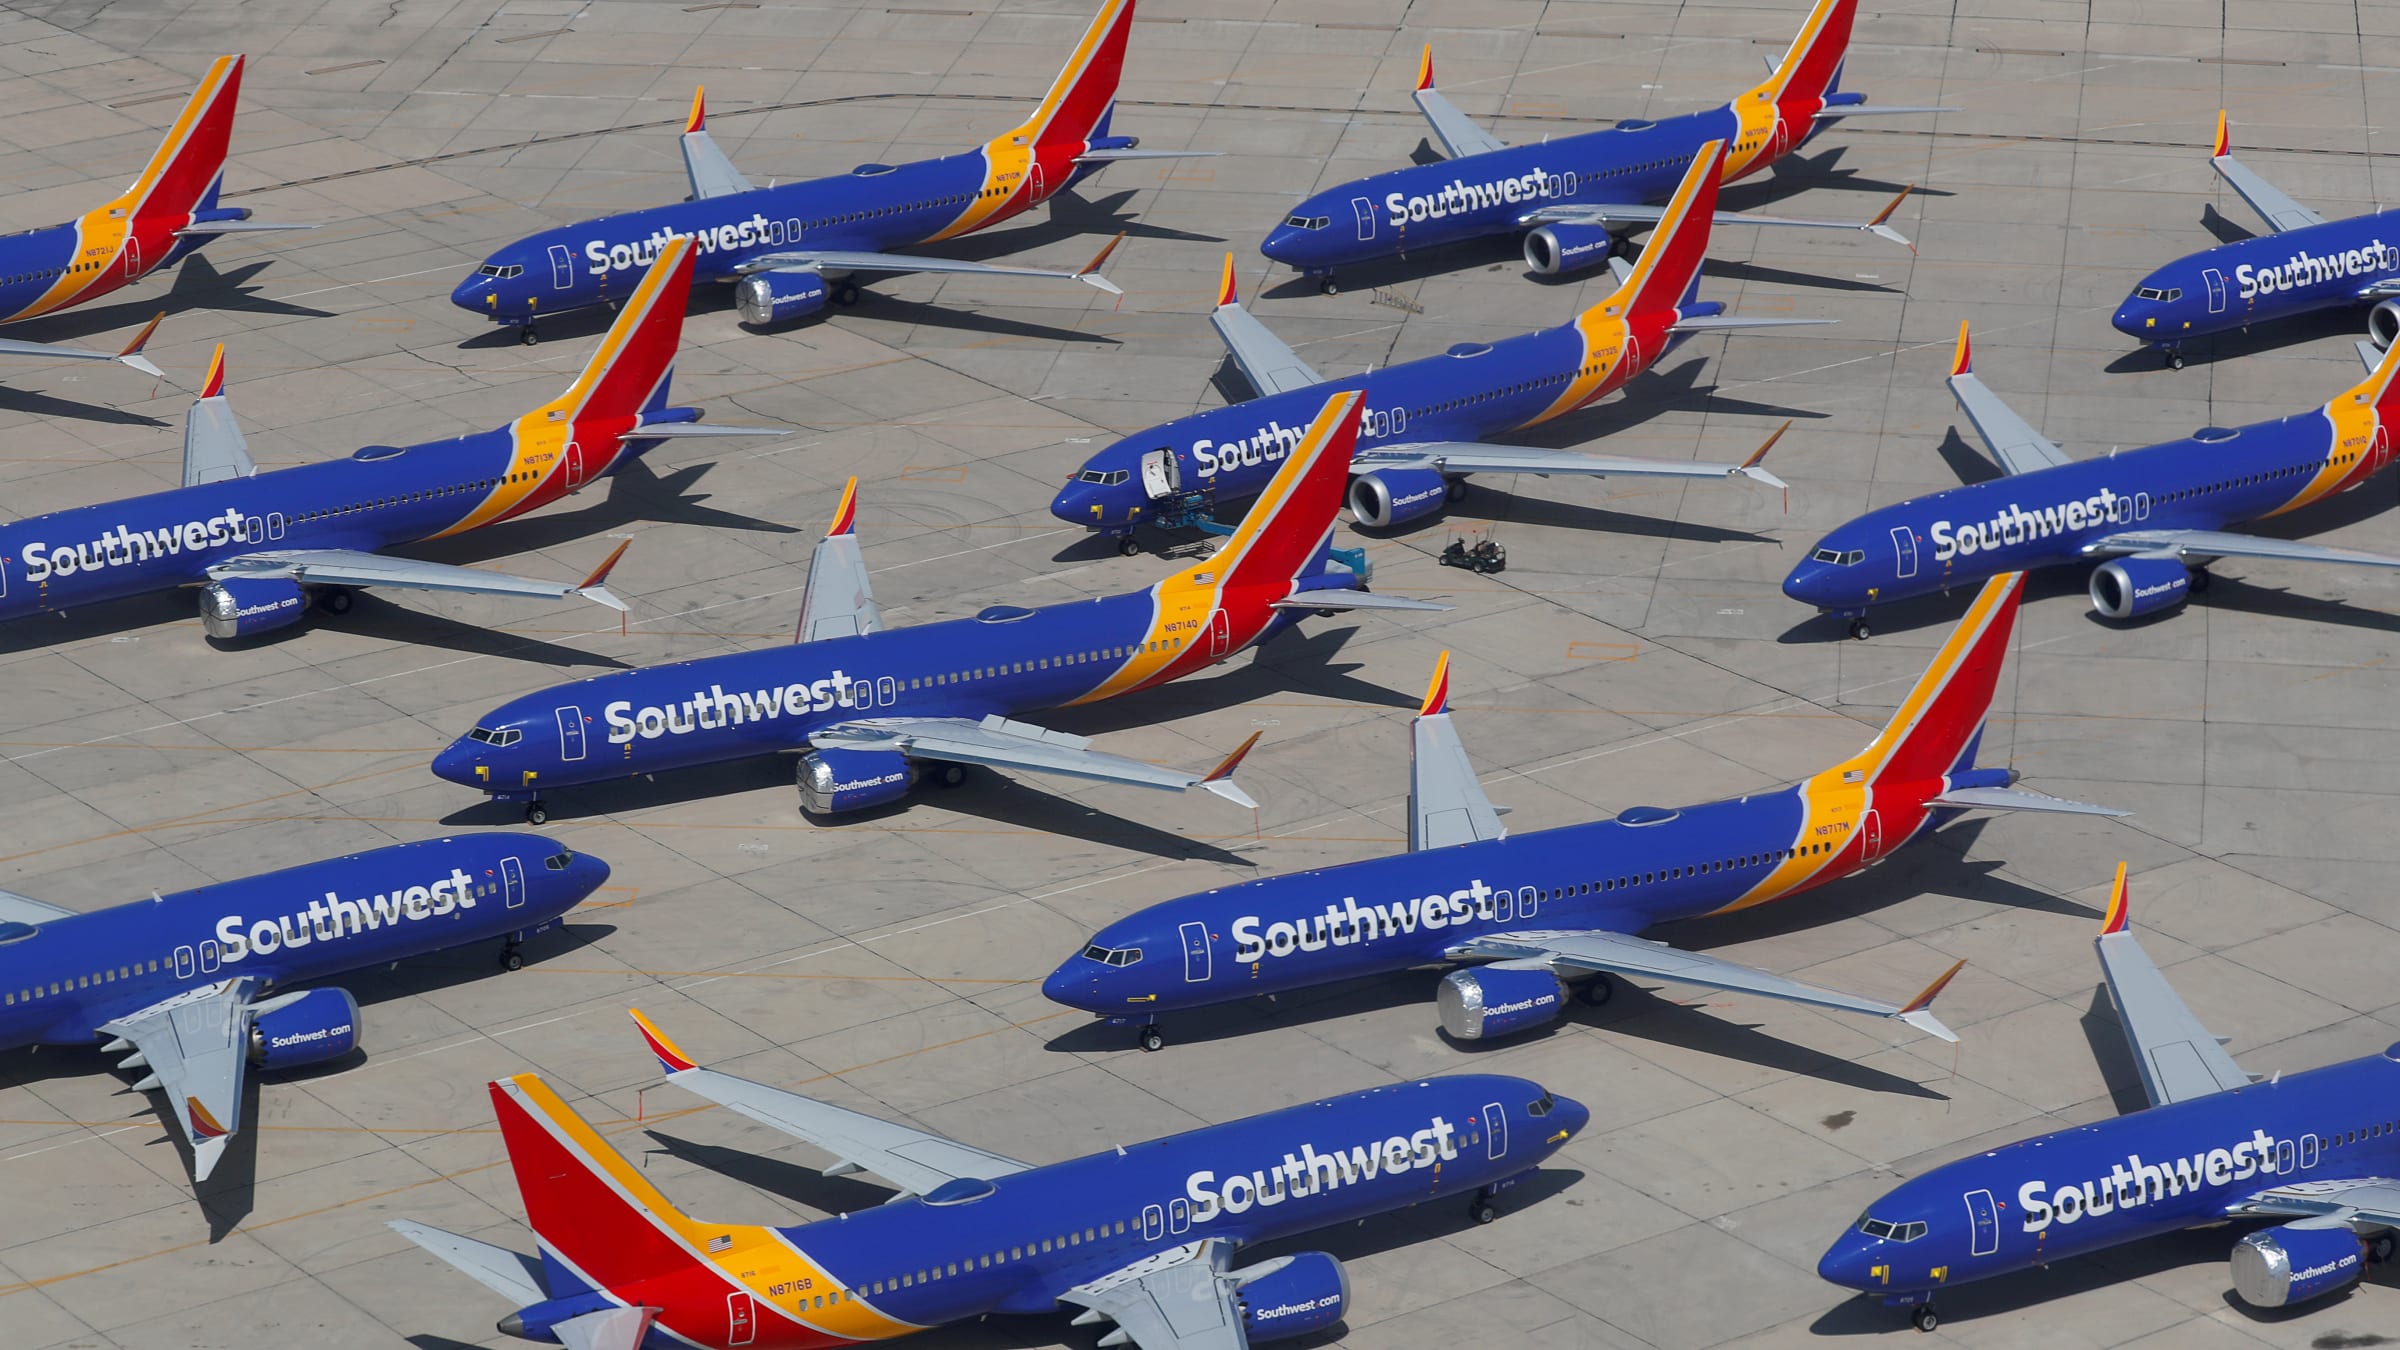 Pilot from another airline helps Southwest plane land safely after